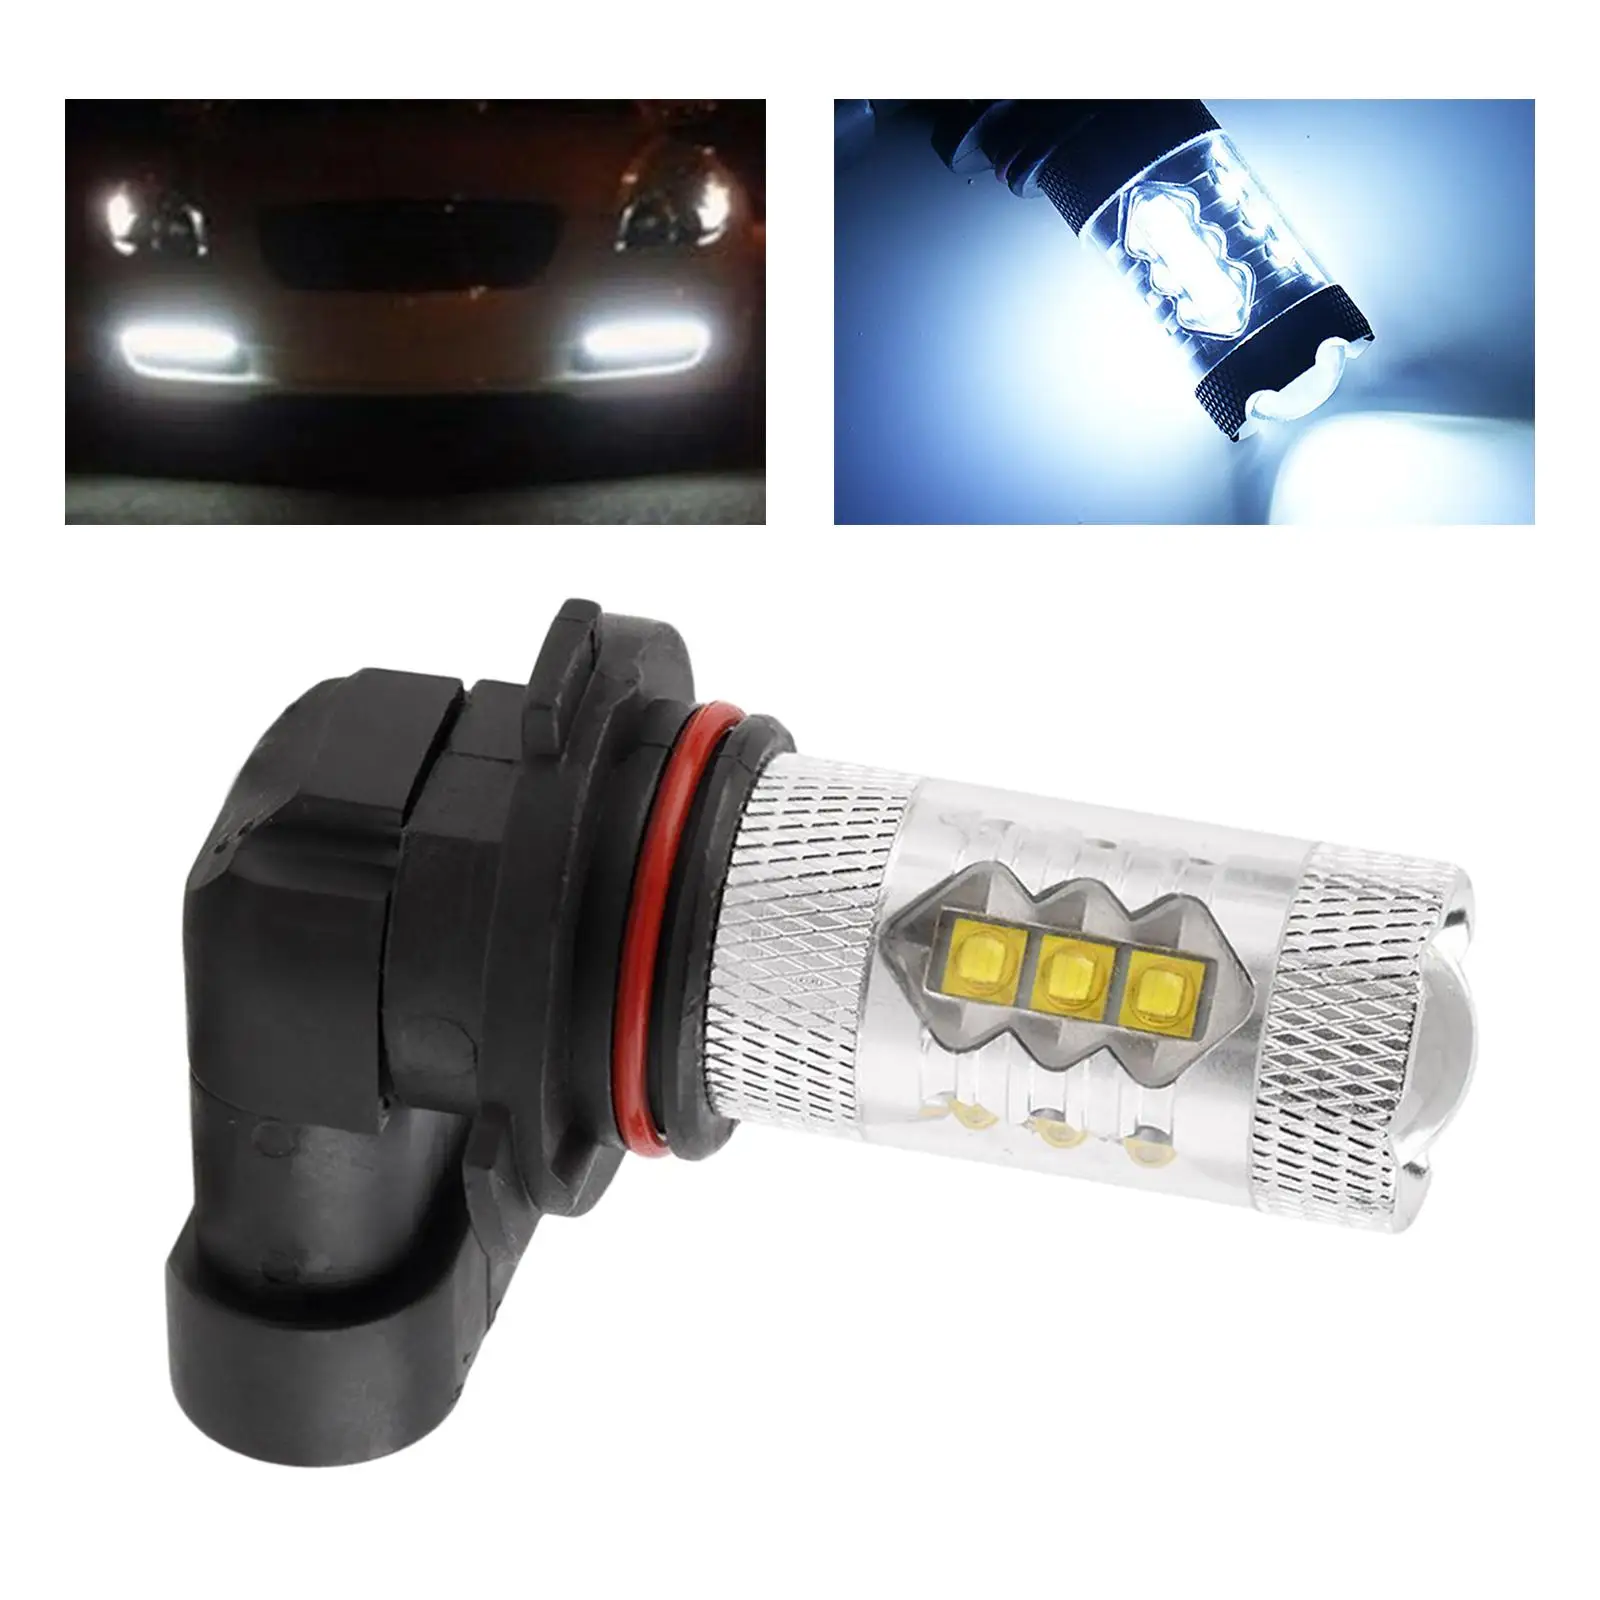 Fog Lights 80W Plug and Play Auto Car Accessories Driving Running Lamp for Truck